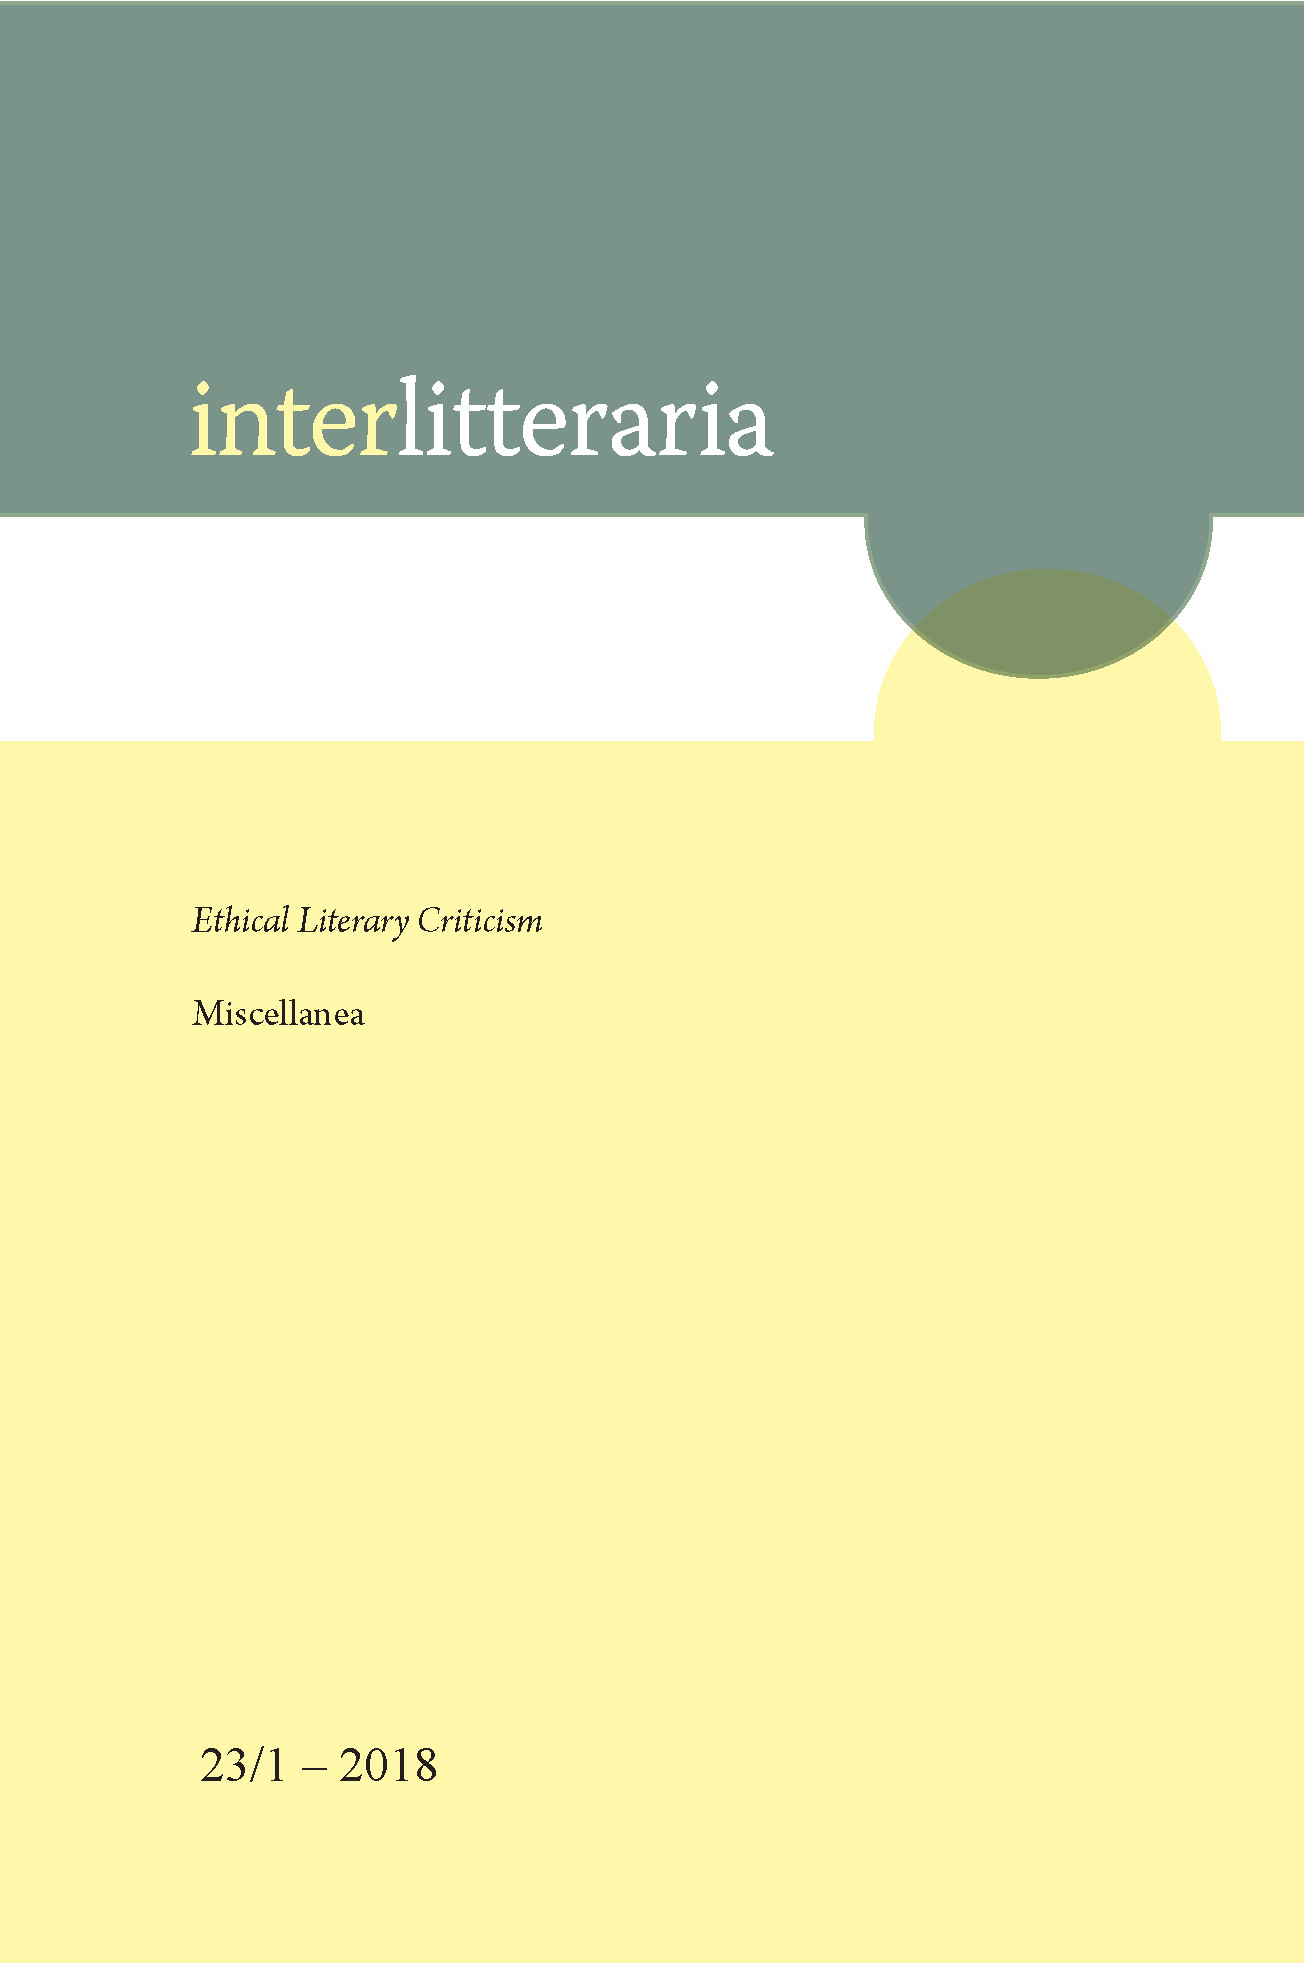 Nineteenth-Century Sentimental and Popular Trends and their Transformation in Fin-de-siècle Latvian Literature